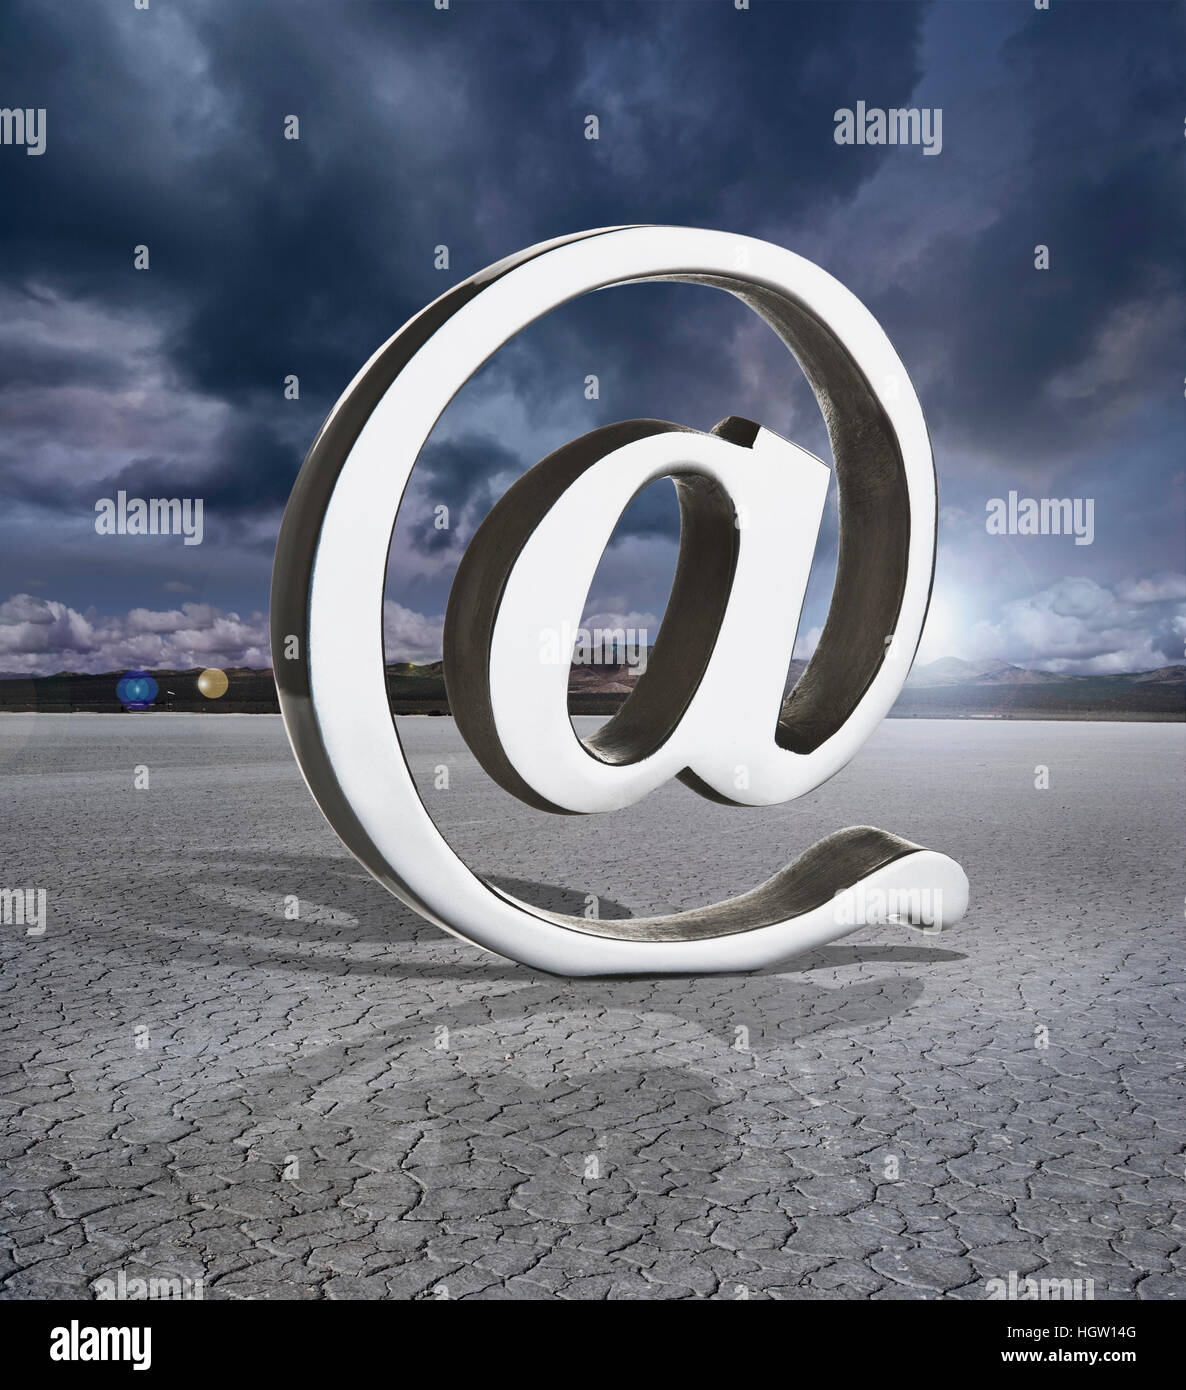 At Symbol In A Dry Lake Bed With Storm Clouds Stock Photo